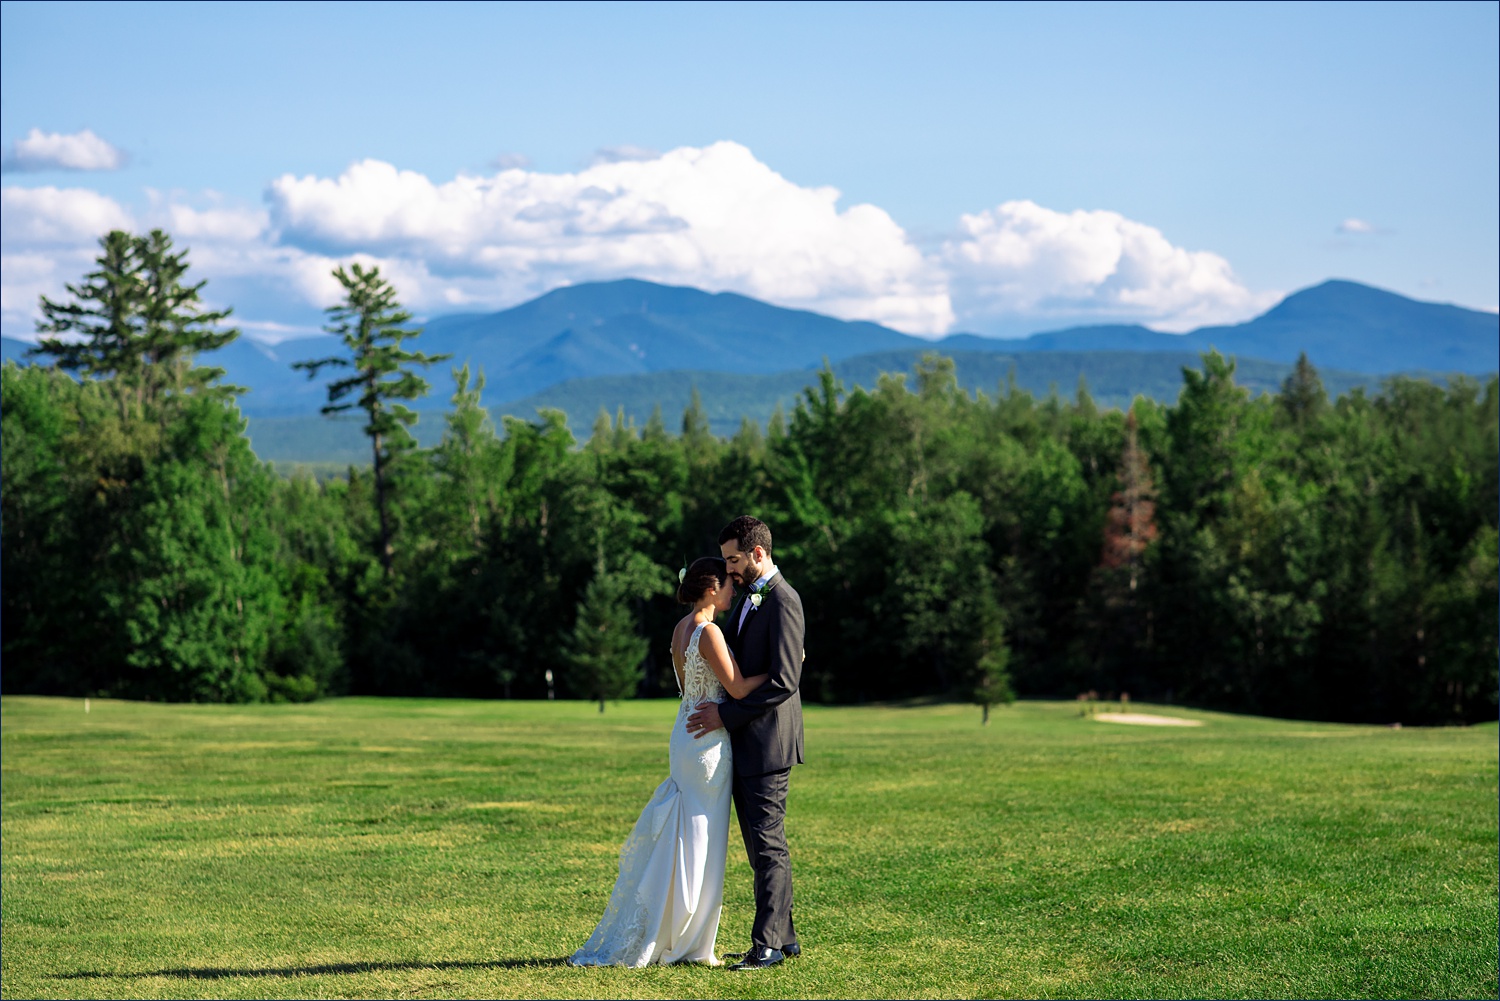 The couple hold one another close as they stand in front of the White Mountains of New Hampshire